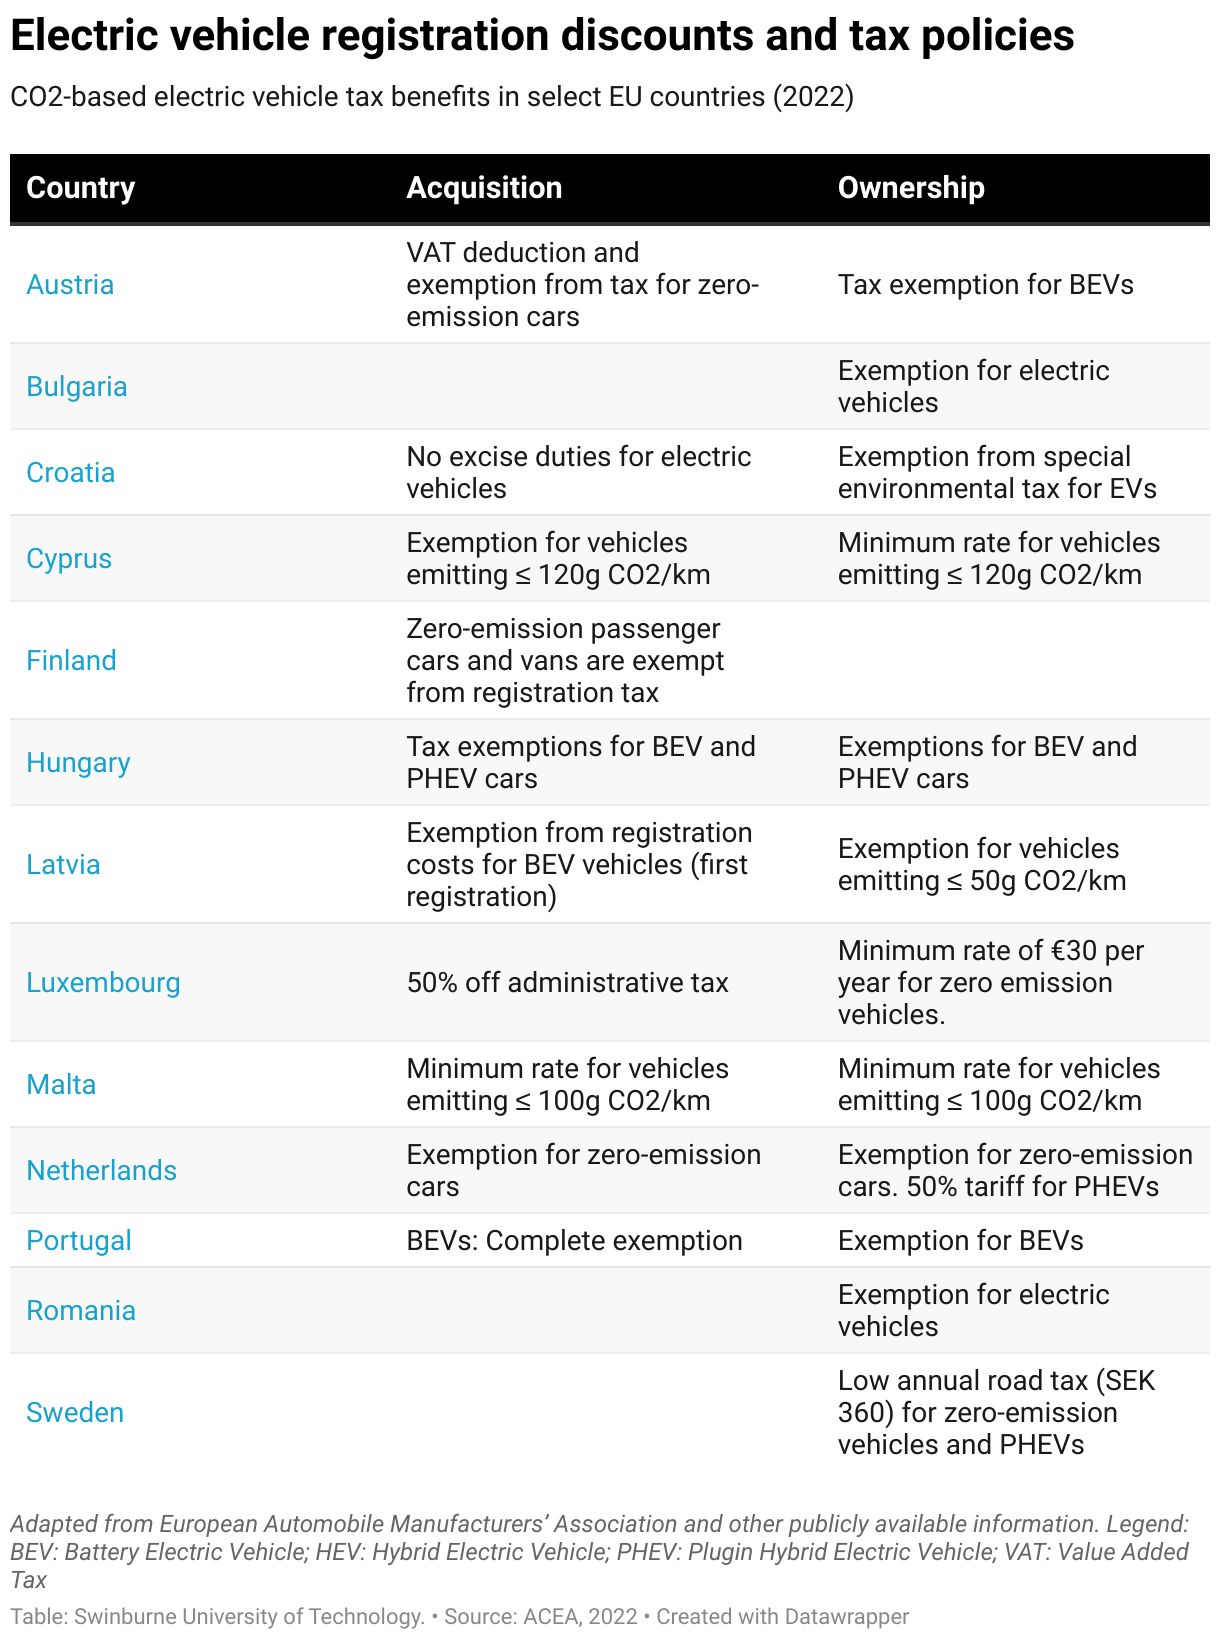 A chart detailing countries and their specific CO2-based electric vehicle tax benefits in the EU. 